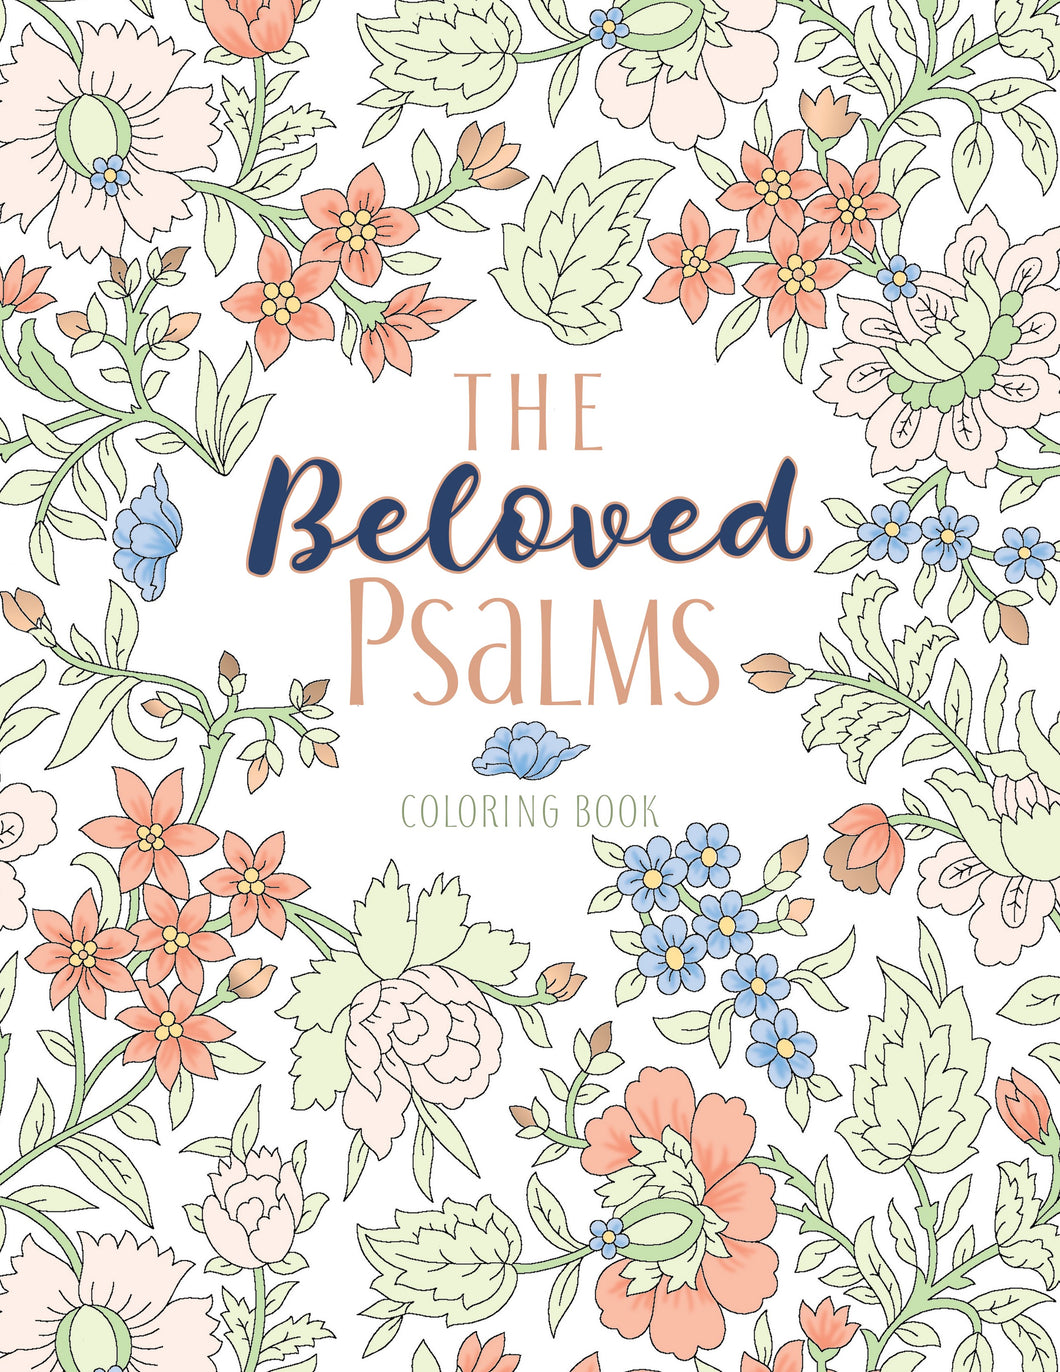 The Beloved Psalms Coloring Book (Majestic Expression)